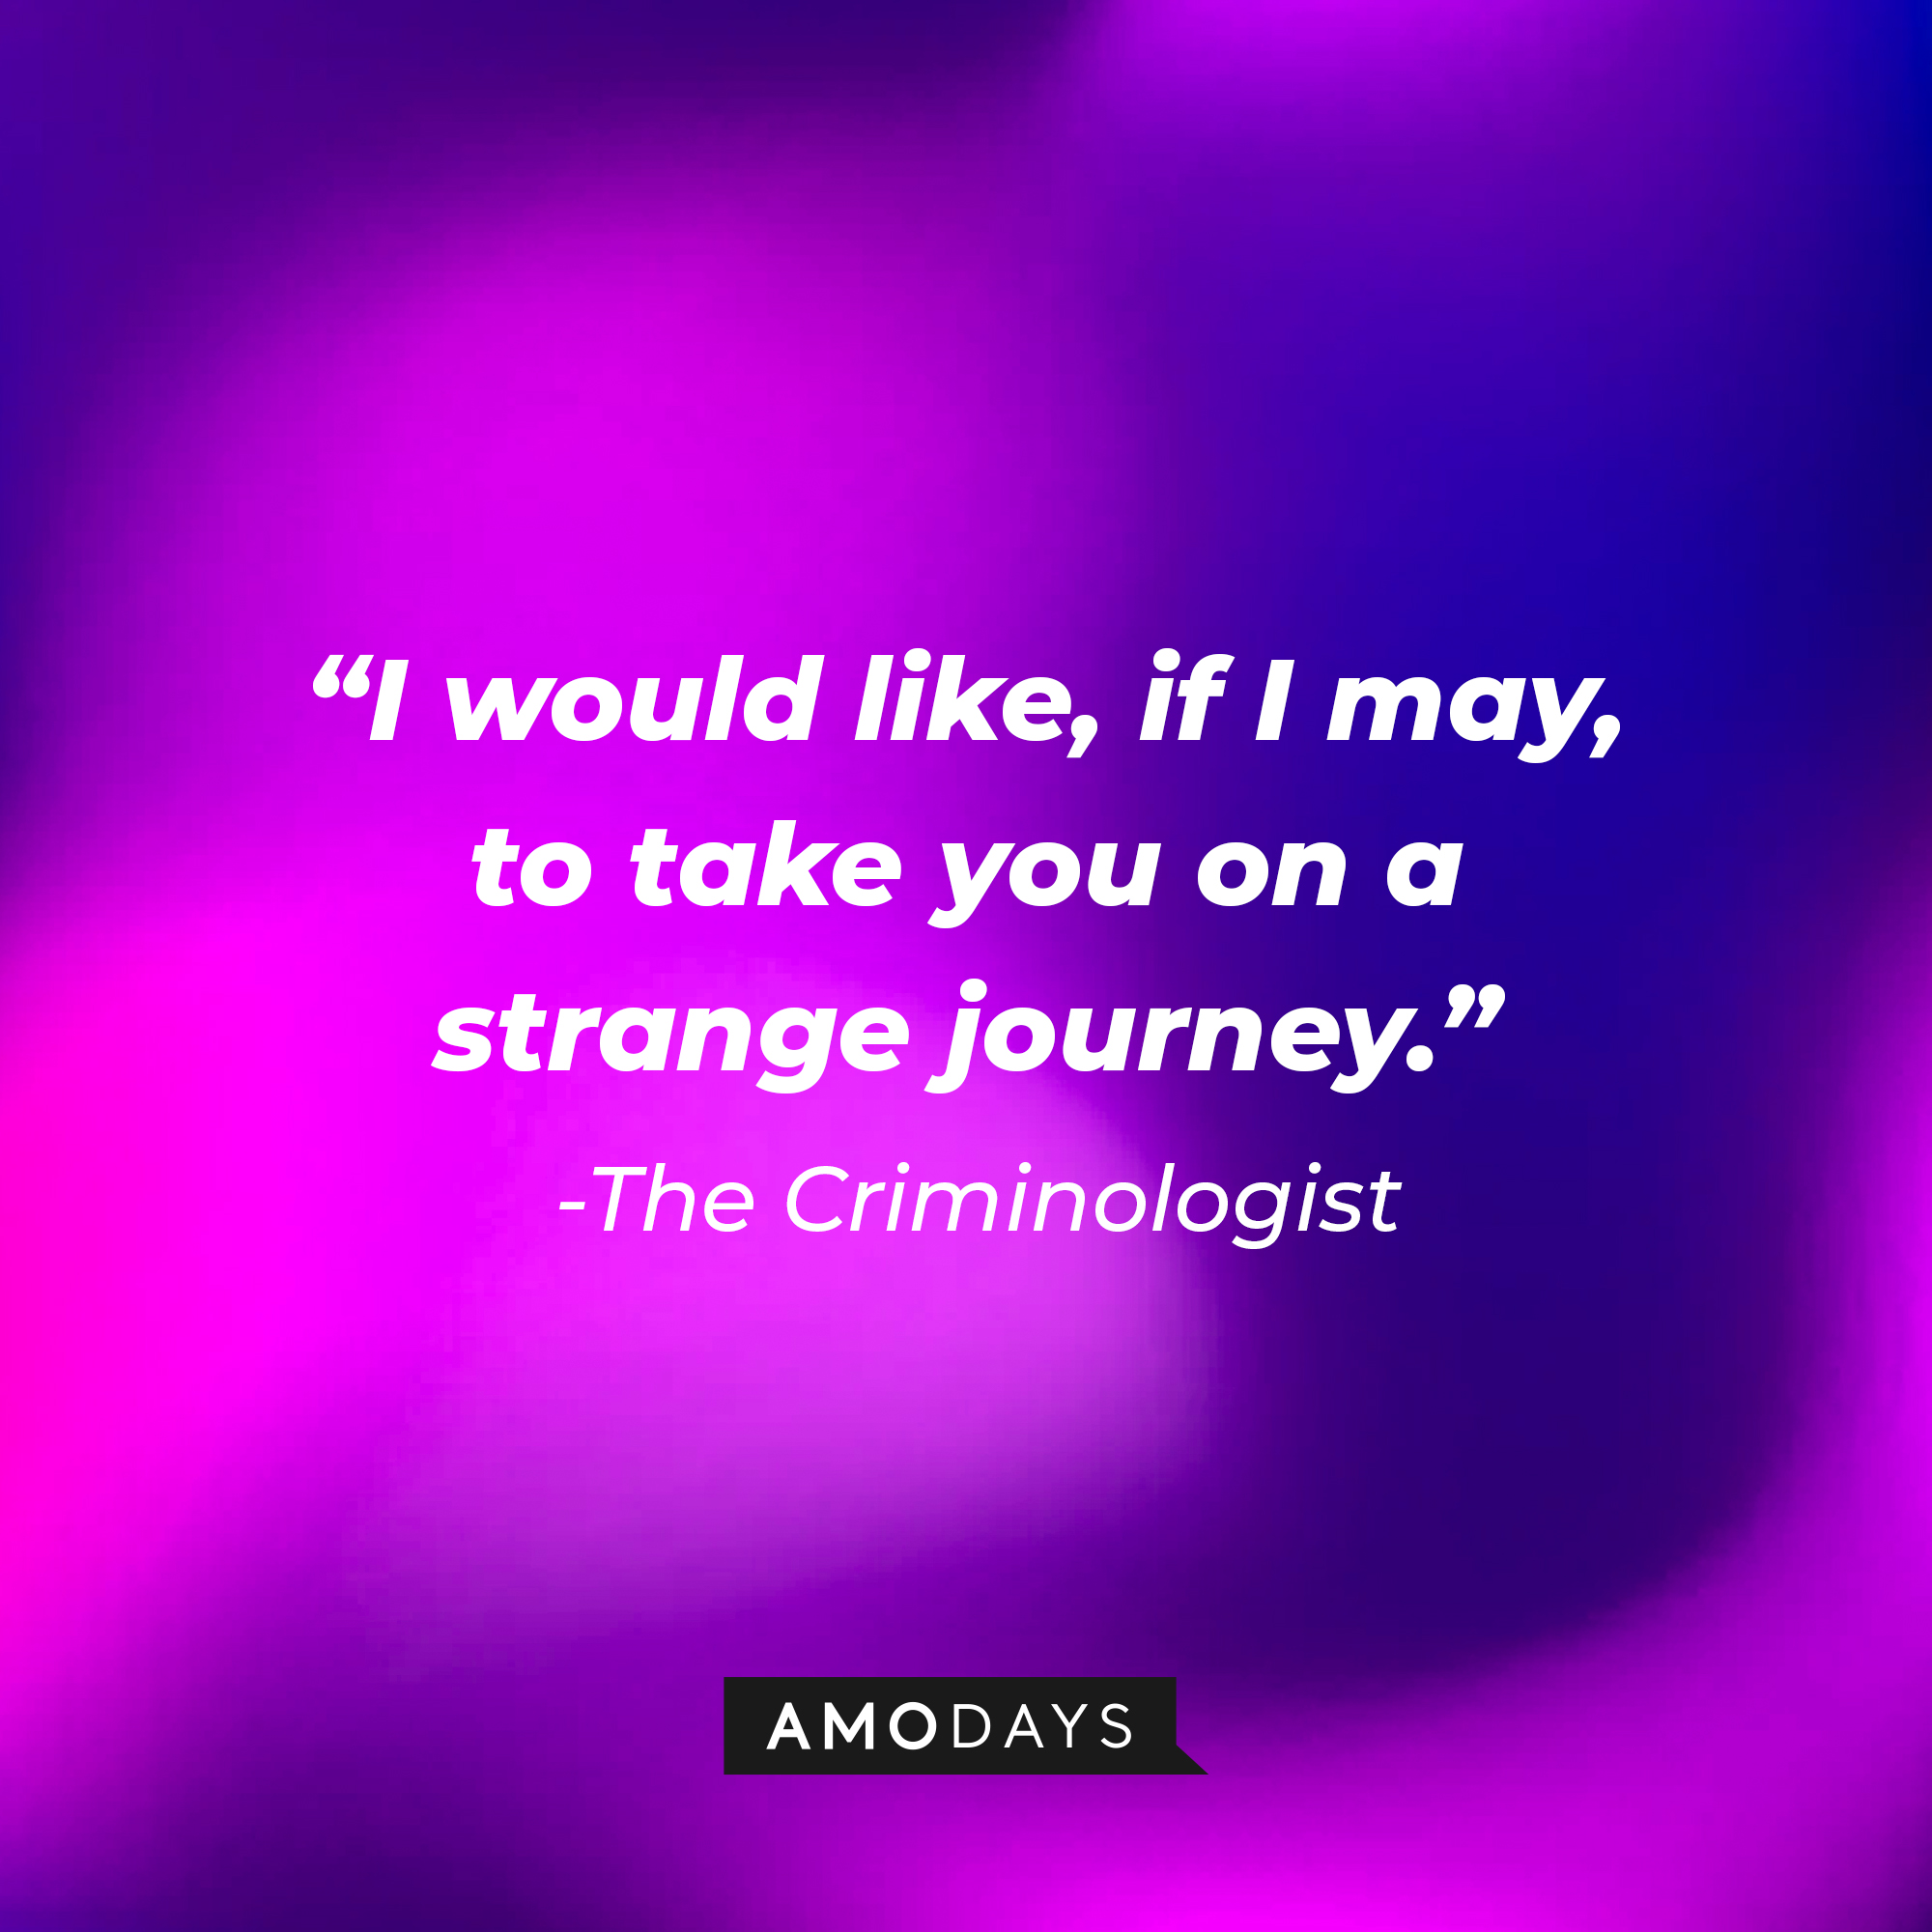 The Criminologist's quote: "I would like, if I may, to take you on a strange journey." | Source: AmoDays